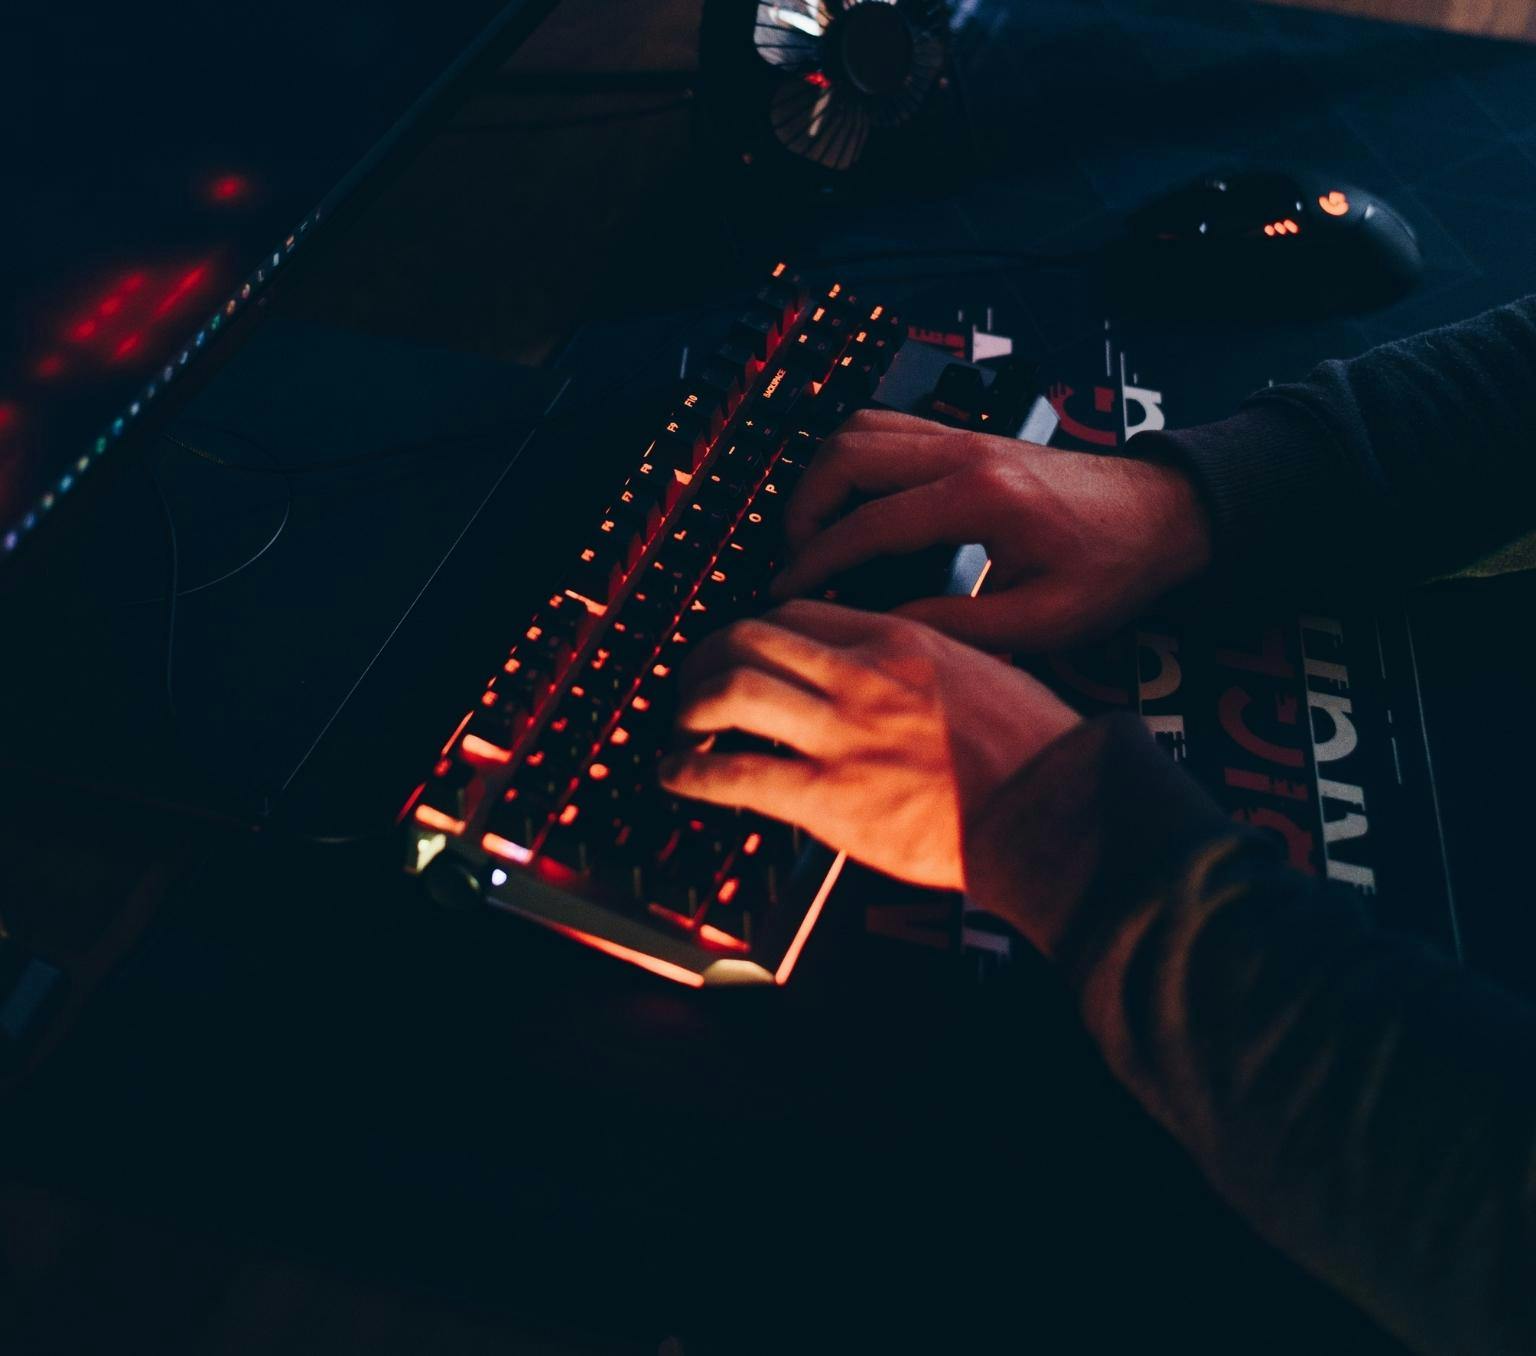 close-up of a persons hands typing on a keyboard. The keyboard is lit by red lights.